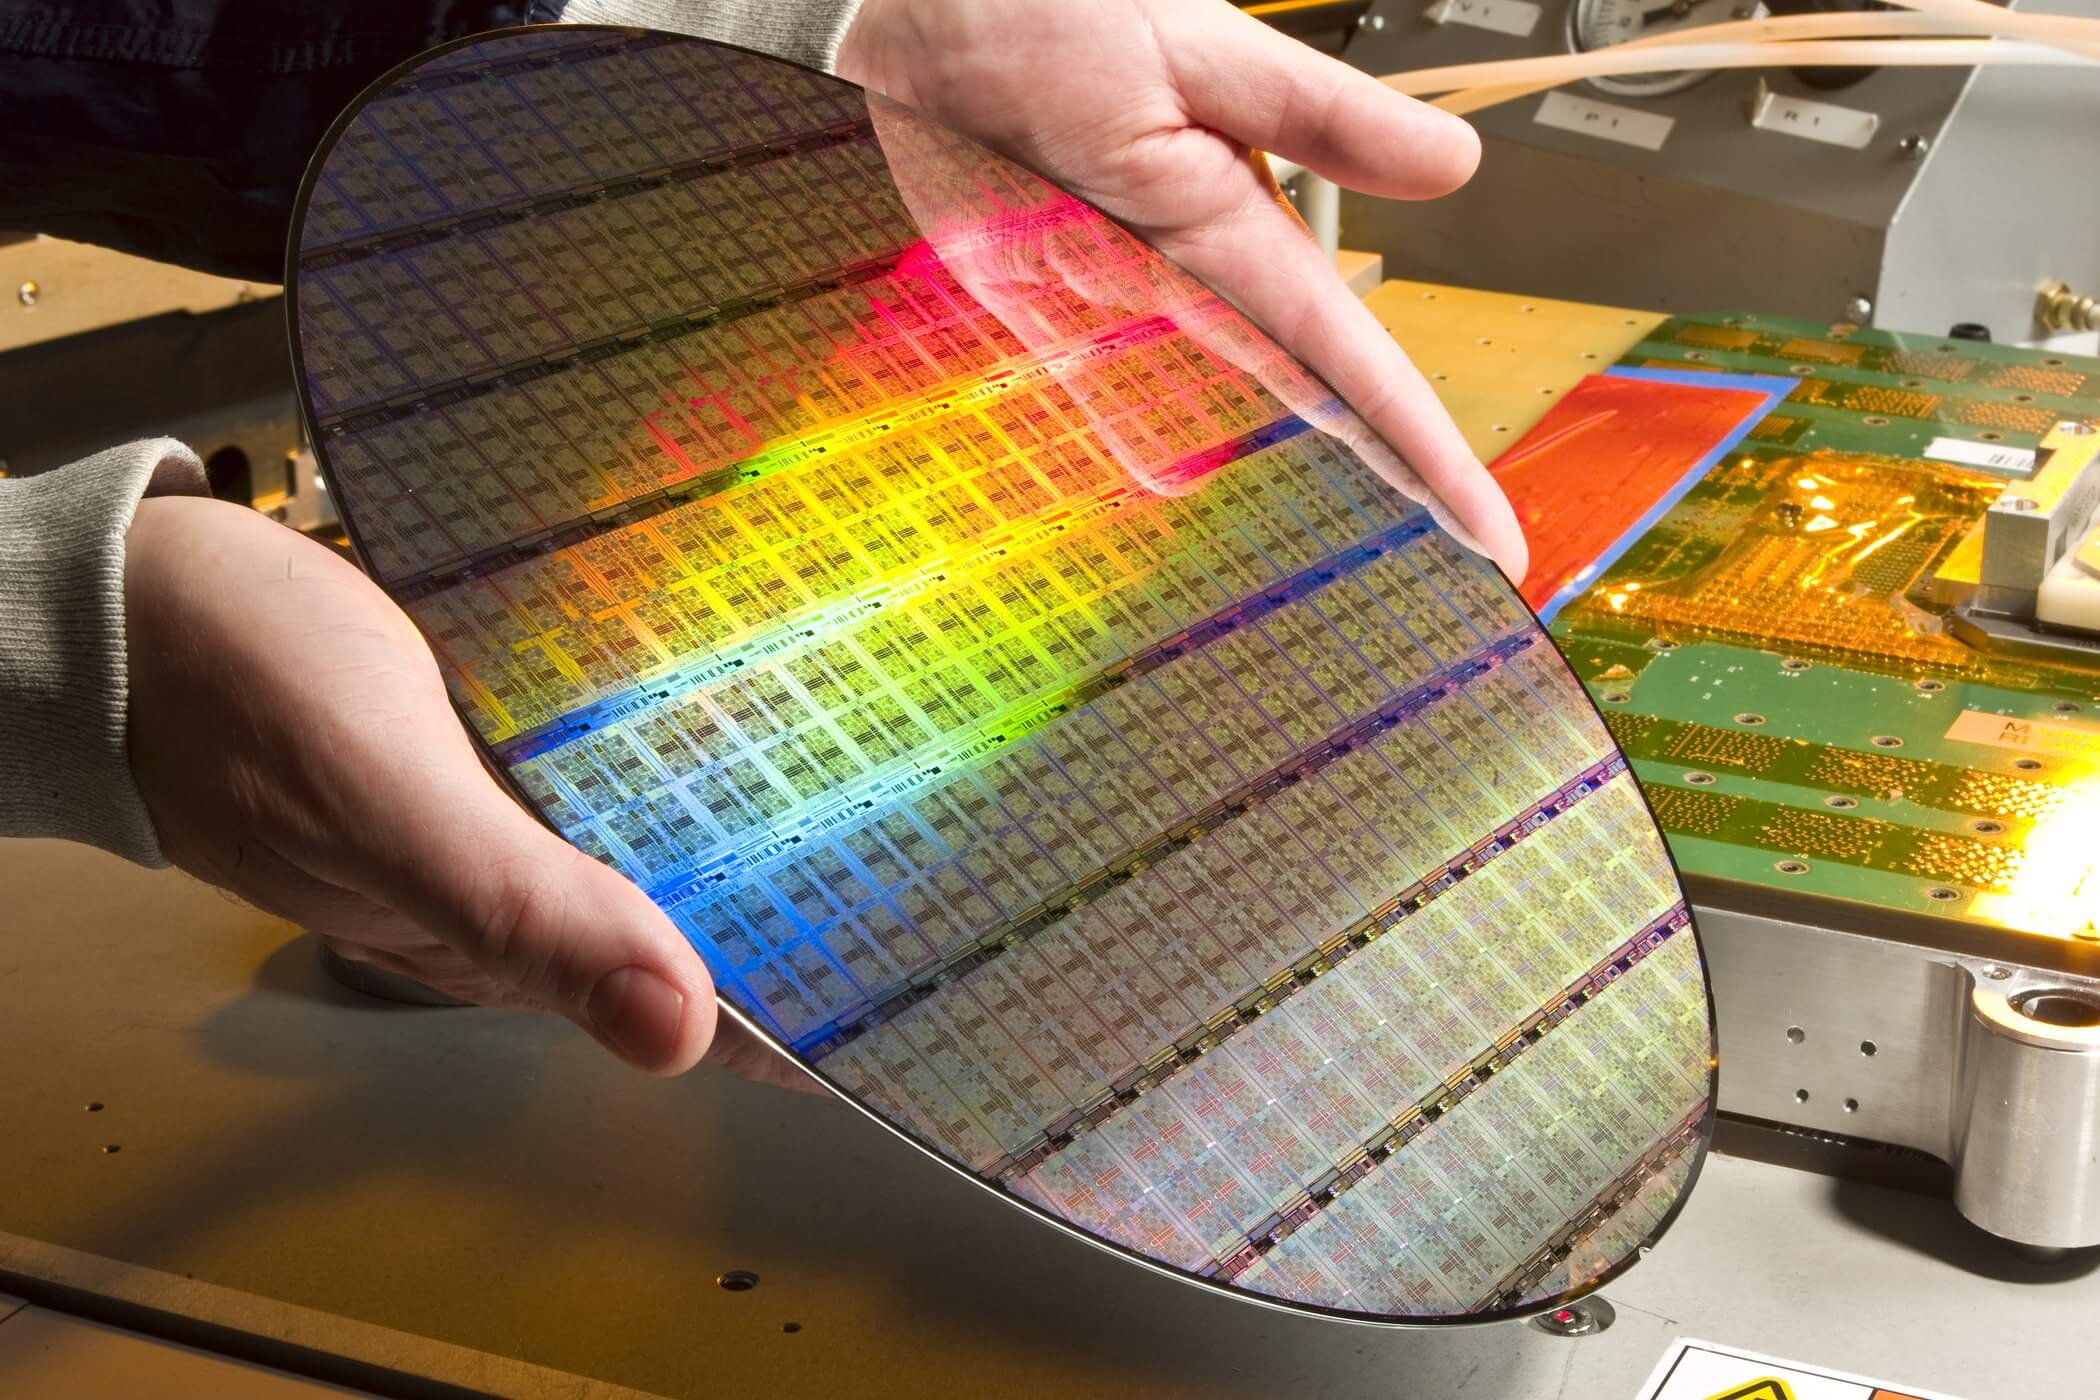 crush spejl Relaterede How CPUs are Designed, Part 3: Building the Chip | TechSpot